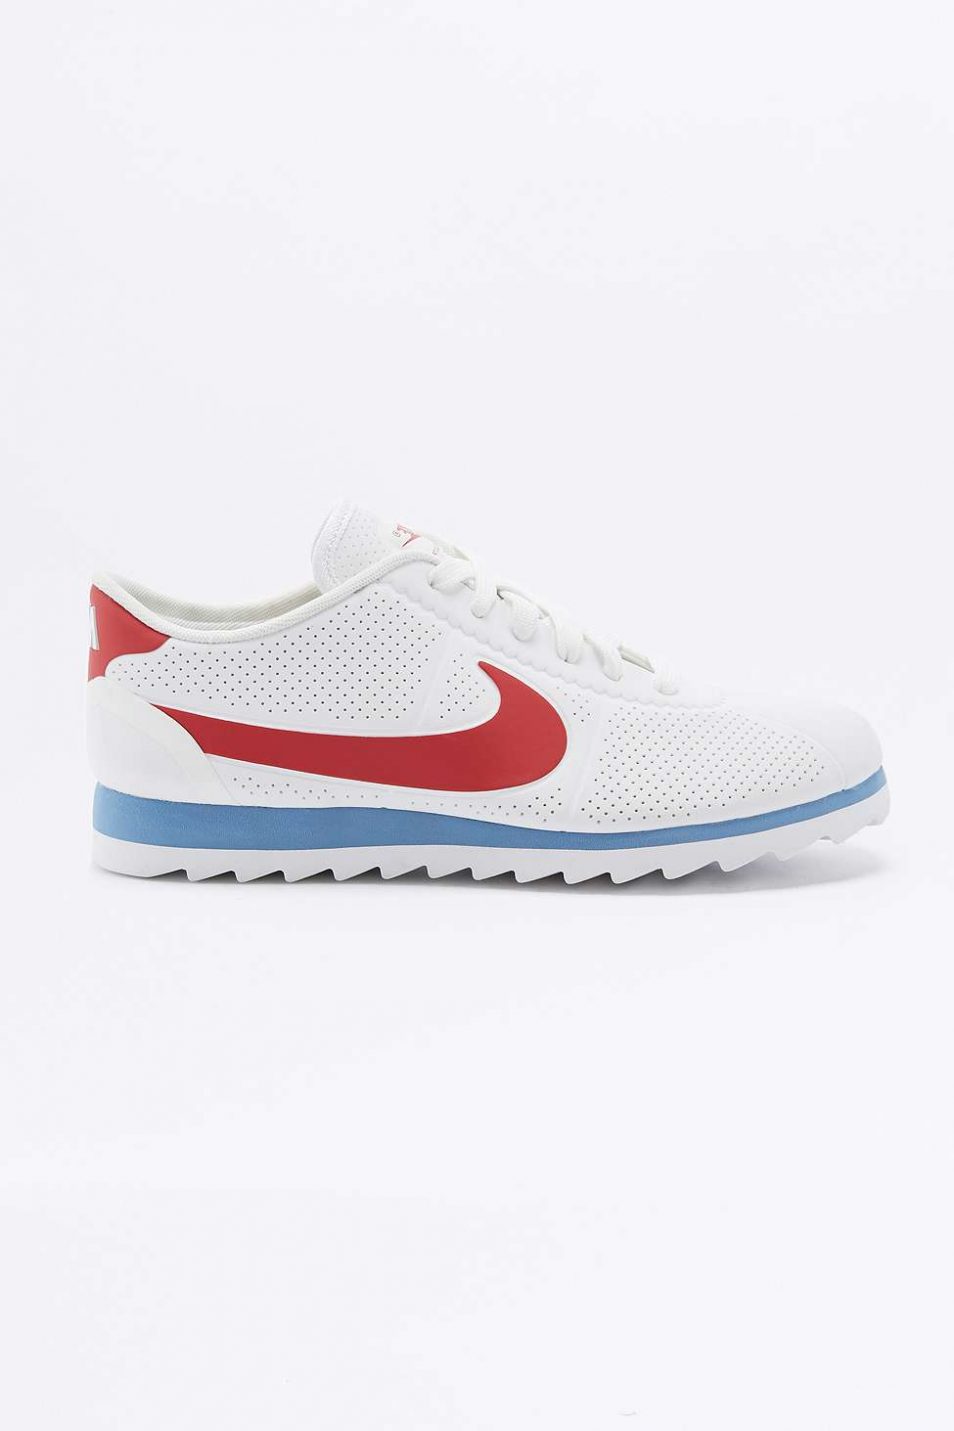 nike cortez ultra moire white red blue Online Shopping -